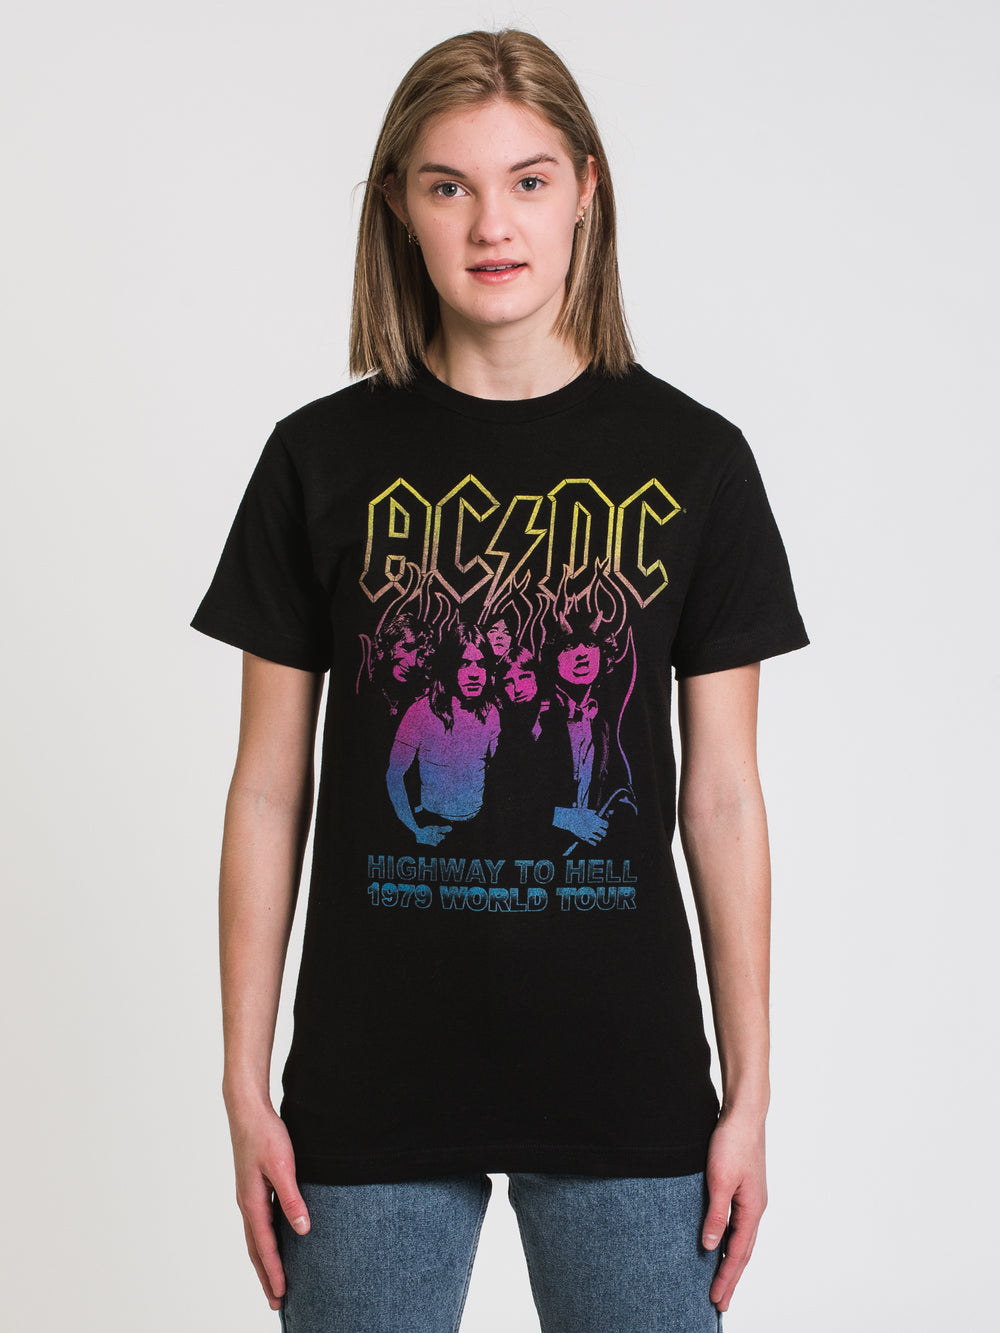 GOODIE TWO SLEEVE AC/DC ON FIRE T-SHIRT  - CLEARANCE